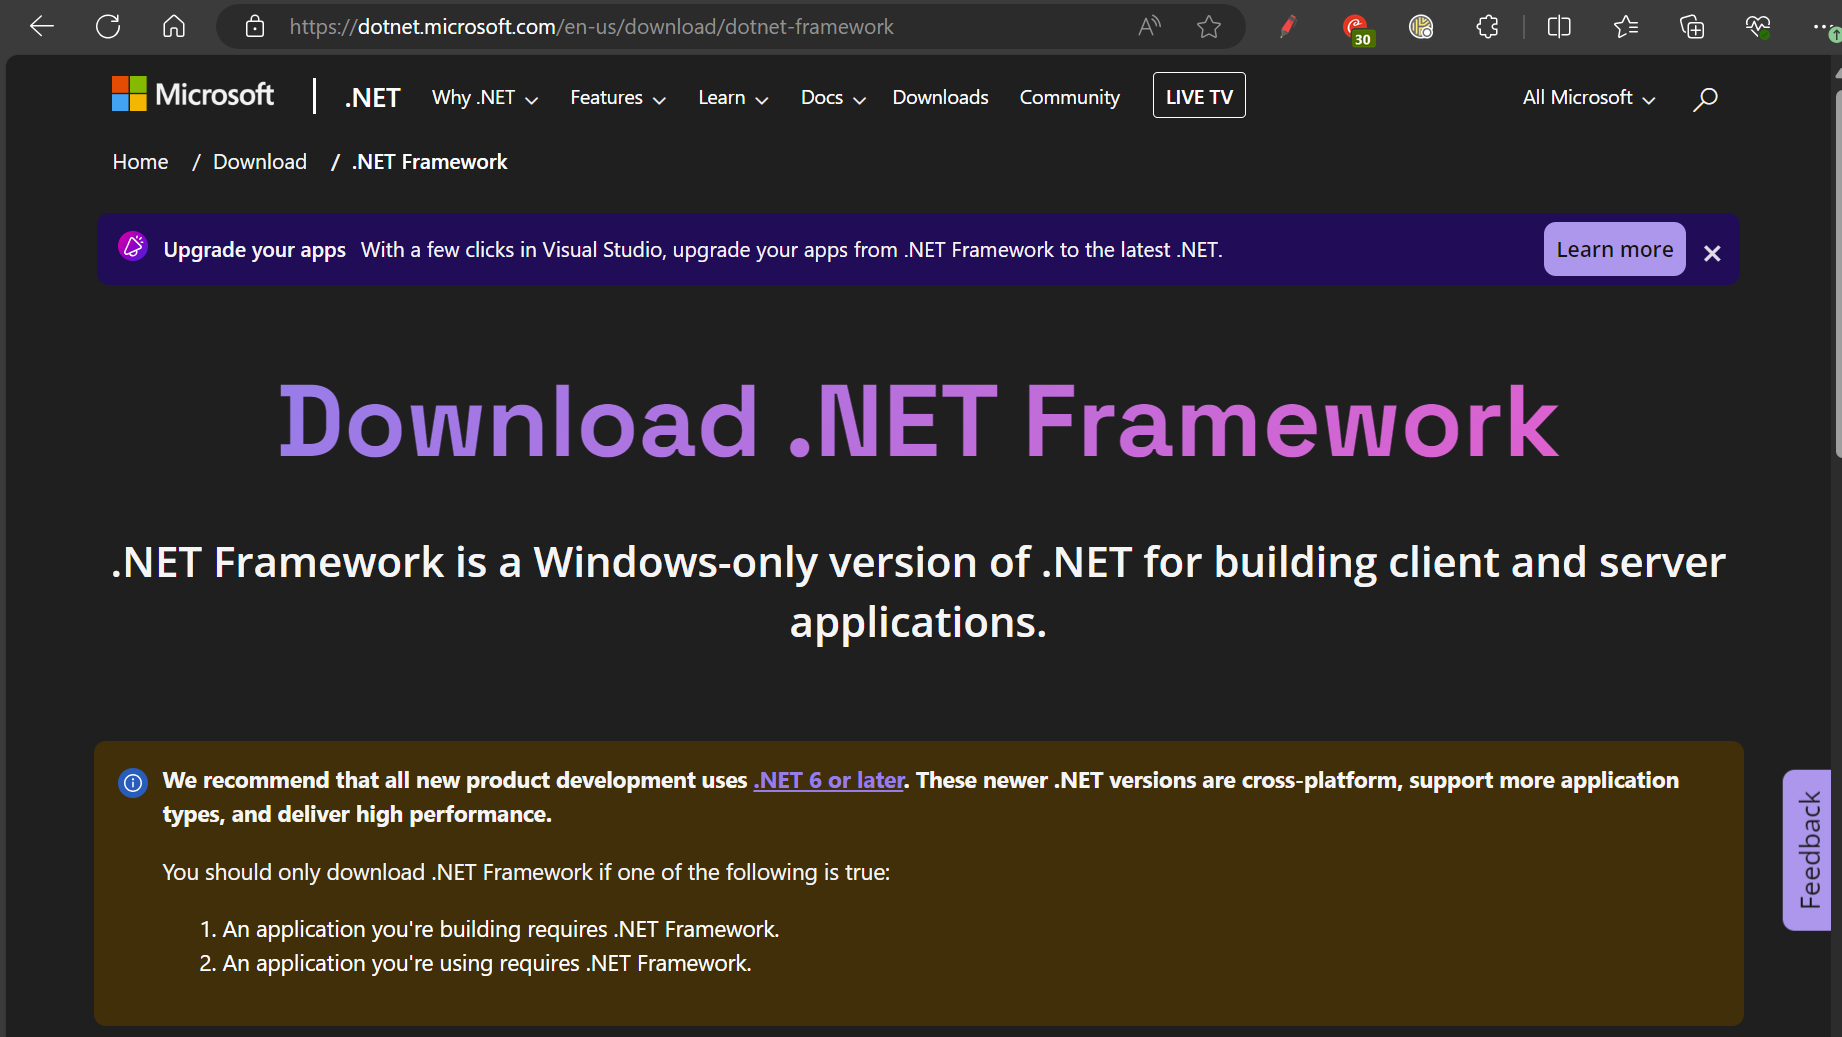 How to Download and Install the .NET Framework?